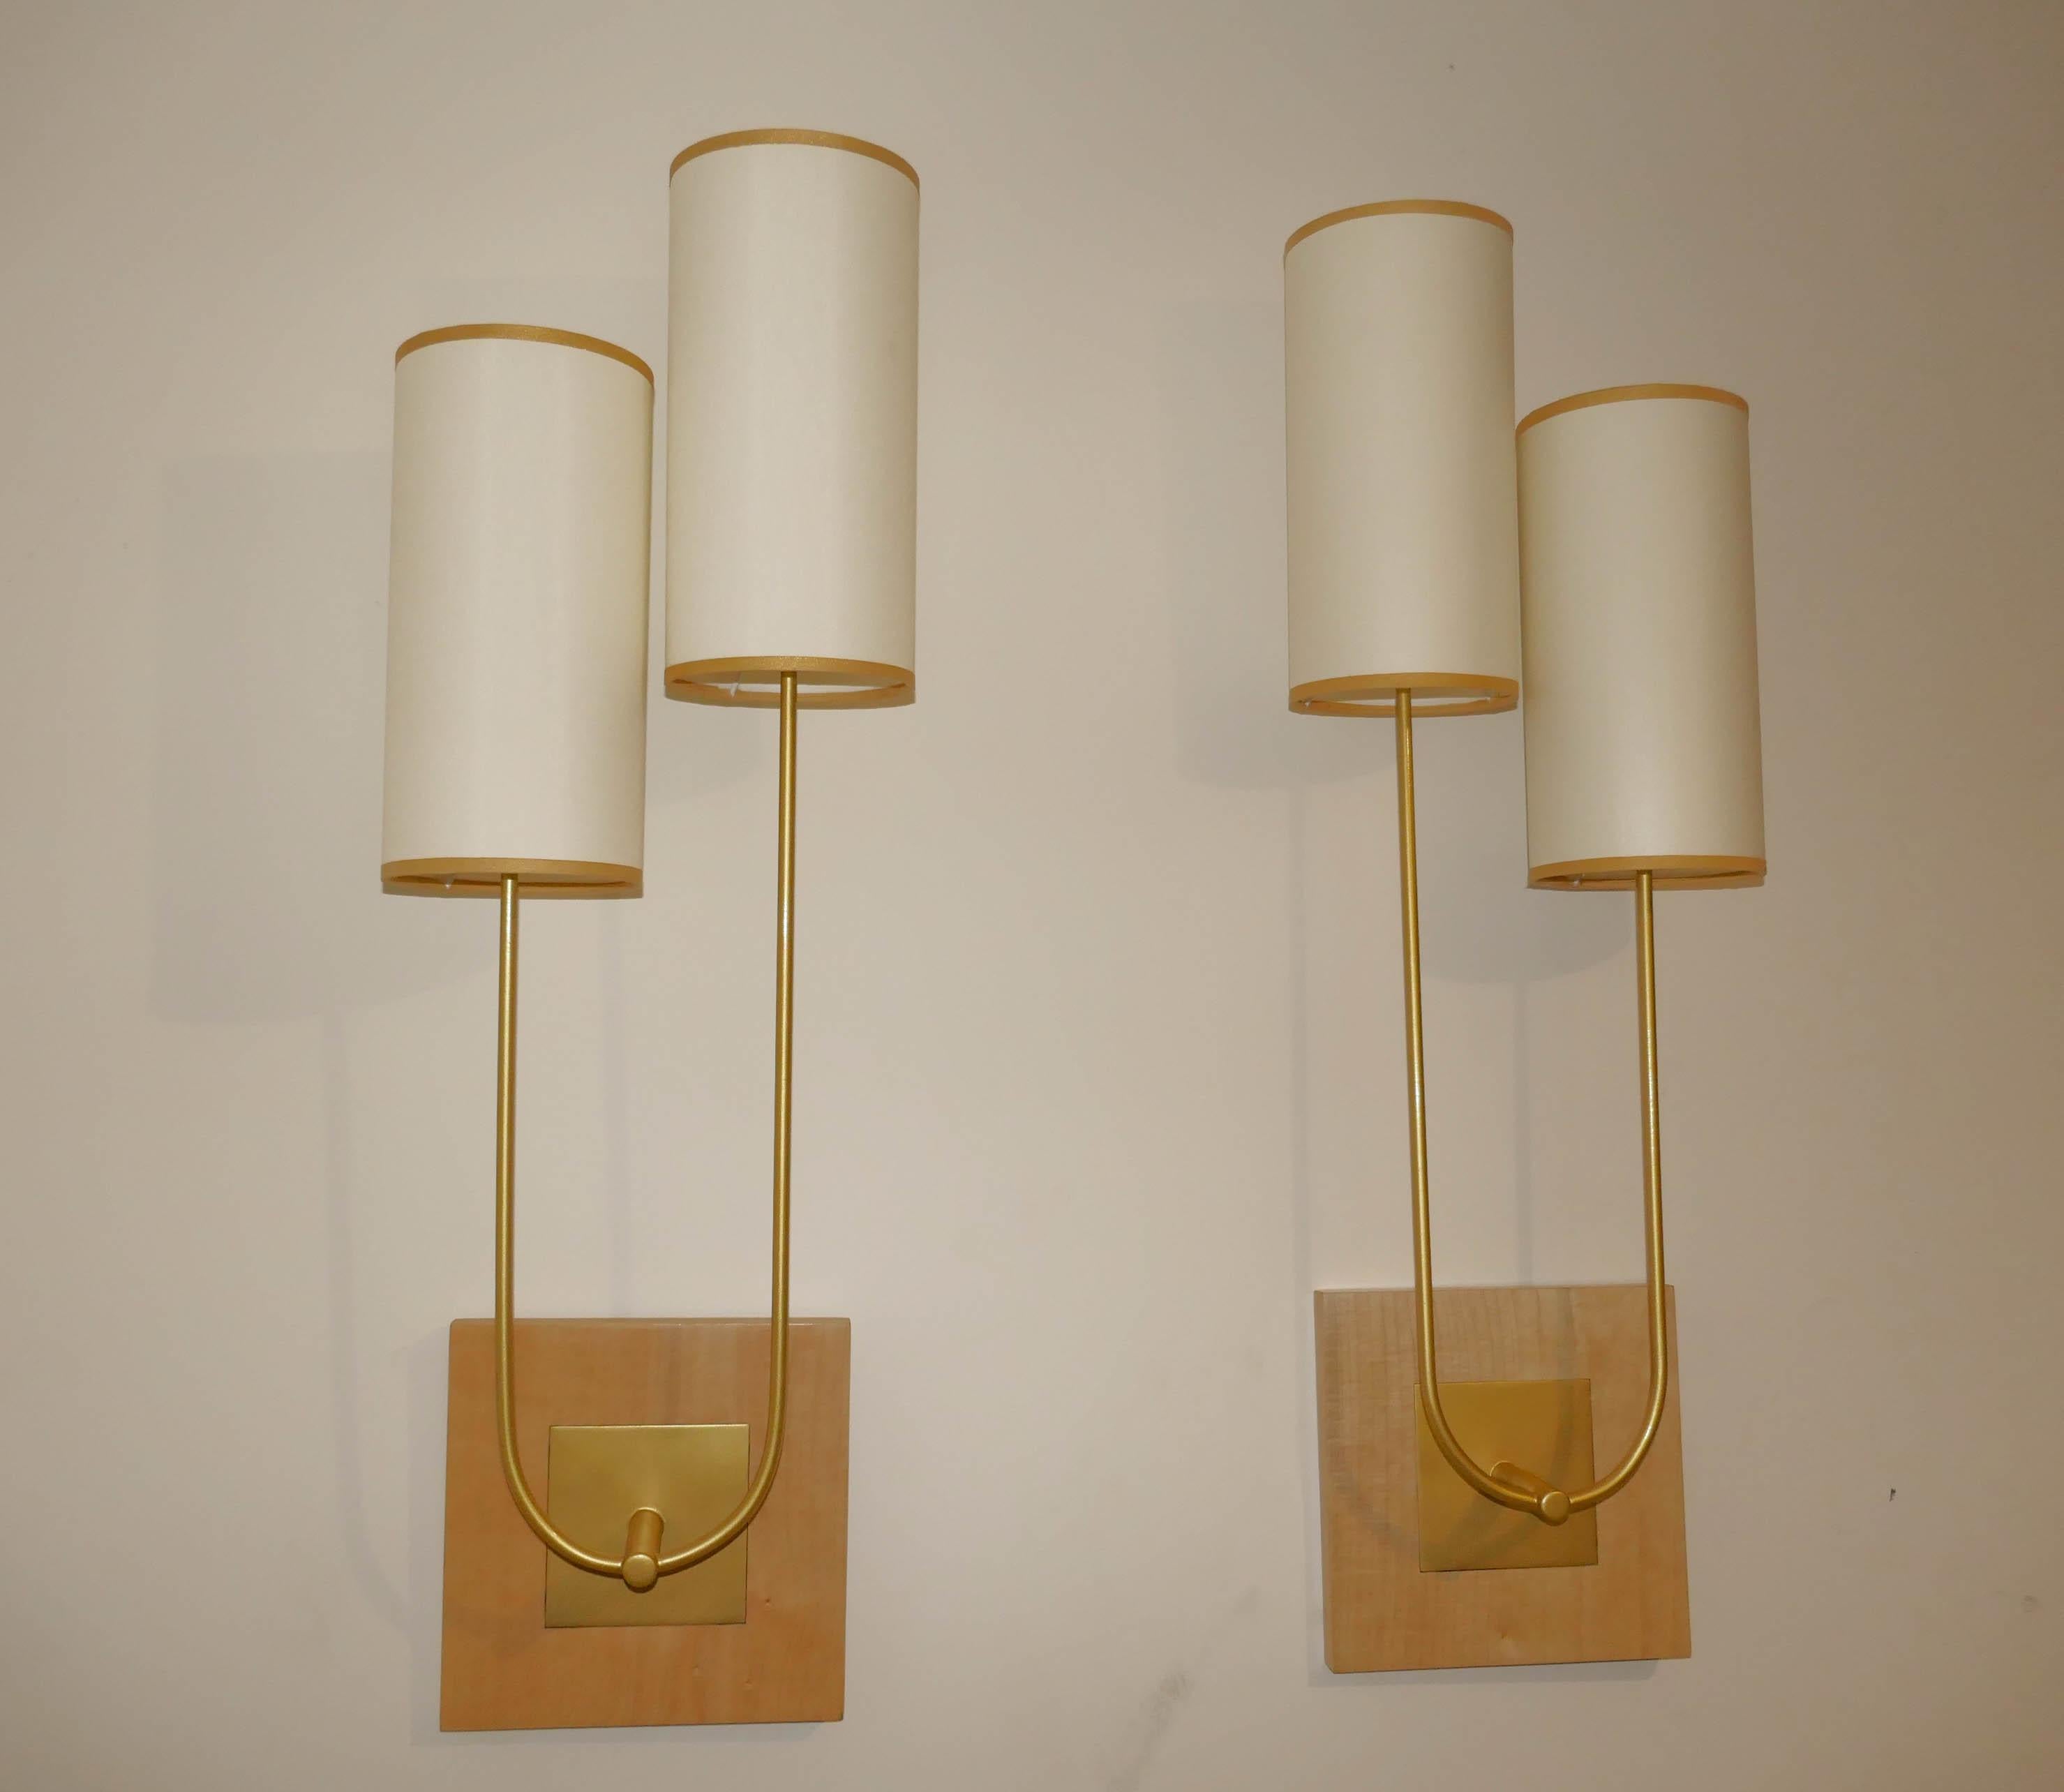 Pair of wall light in metal with gold patina with wooden Sycomore plate. The lamp shades and in silk fabric with gold braid. The wall lamps will take led bumps e27 and b22 with an adapter provided with the lights.
Information about the covid 19.
